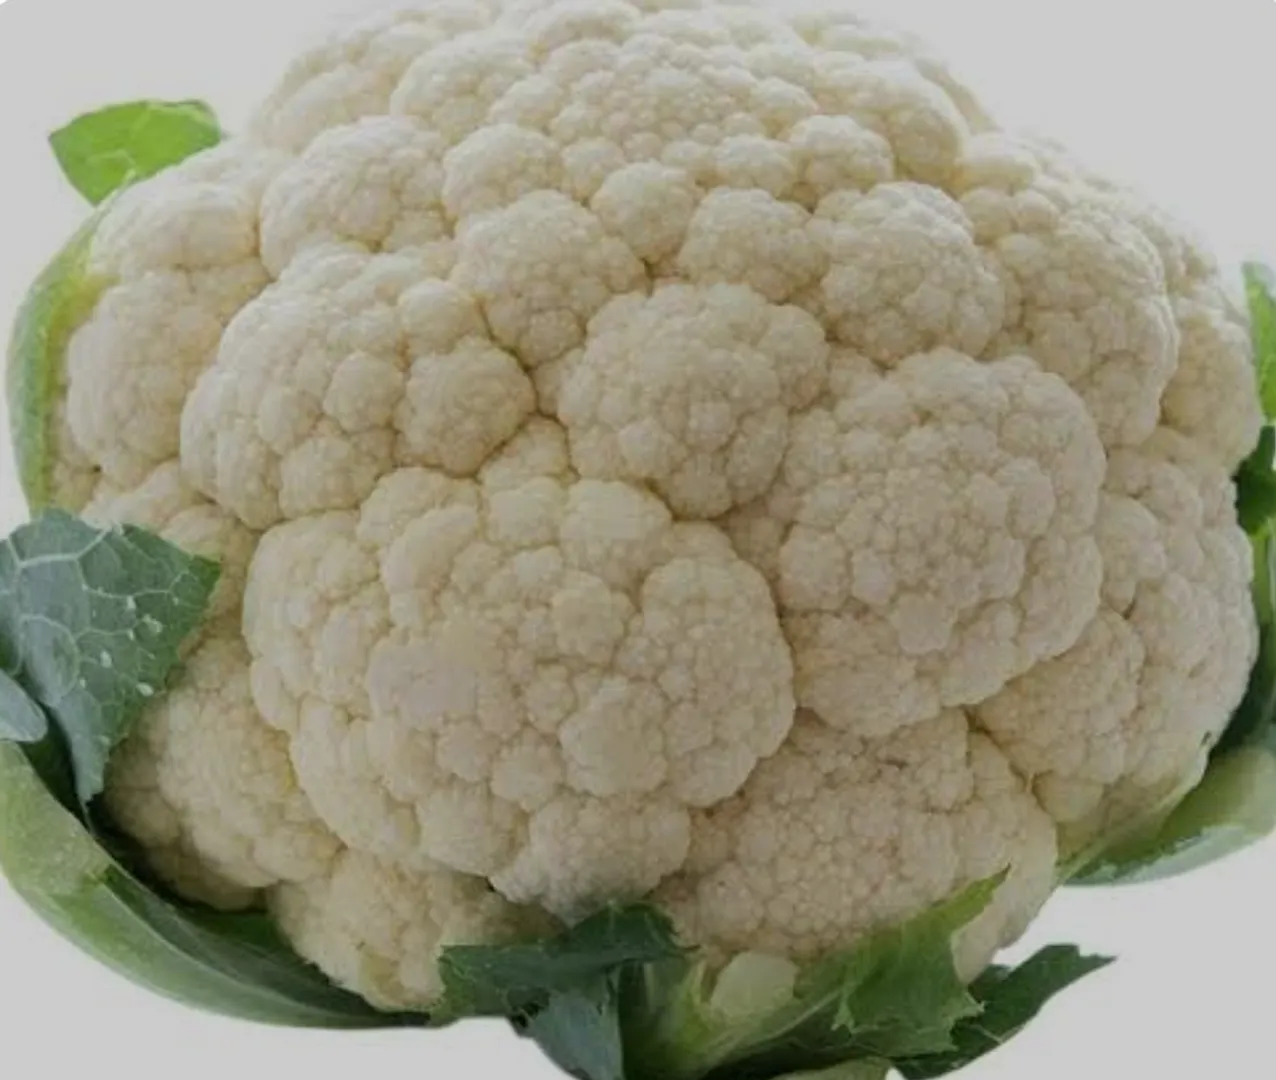 Cauliflower: A Crucial Component of Immune Support

When it comes to white foods that can enhance your immune system, cauliflower deserves a special mention. This unassuming cruciferous vegetable is a powerhouse of nutrients that contribute to overall health and immunity. Let's explore how cauliflower can play a vital role in strengthening your body's defense mechanisms.

The Nutritional Value of Cauliflower:
Cauliflower is rich in a variety of essential nutrients that can bolster your immune system. Among these nutrients are:

1. Vitamin C: Just like other white foods, cauliflower contains vitamin C, a potent antioxidant that aids in protecting cells from damage caused by harmful free radicals. This vitamin also supports the production and function of immune cells, enhancing your body's ability to fight off infections.

2. Fiber: Fiber is a key player in maintaining a healthy gut environment. A balanced gut microbiome is closely linked to optimal immune function, as a significant portion of immune cells resides in the gut. Consuming fiber-rich foods like cauliflower can promote the growth of beneficial gut bacteria and enhance overall immune response.

3. Glucosinolates: Cauliflower contains glucosinolates, natural compounds that have been studied for their potential to support immune health. These compounds have antioxidant and anti-inflammatory properties, which can contribute to a stronger immune system.

Incorporating Cauliflower into Your Diet:
The versatility of cauliflower makes it easy to include in various dishes, ensuring you reap its immune-boosting benefits. Here are some creative ways to incorporate cauliflower into your meals:

1. Roasted Cauliflower: Roasting cauliflower brings out its natural sweetness and provides a satisfying texture. Toss cauliflower florets with olive oil, seasonings, and herbs, then roast until they're golden and tender.

2. Cauliflower Rice: Use cauliflower as a low-carb alternative to rice. Simply pulse cauliflower in a food processor until it reaches a rice-like consistency. Sauté it with your favorite vegetables and seasonings for a wholesome side dish.

3. Cauliflower Mash: Create a creamy and nutritious alternative to mashed potatoes by steaming cauliflower and mashing it with a touch of butter or olive oil. Add garlic, herbs, or a sprinkle of grated cheese for extra flavor.

4. Cauliflower Soup: Blend steamed cauliflower with broth and seasonings to make a creamy and comforting soup. Customize it with your favorite herbs and spices for a satisfying bowl of immune-boosting goodness.

Conclusion:
Cauliflower is a white food that should not be overlooked when it comes to supporting your immune system. Packed with vitamin C, fiber, and unique compounds like glucosinolates, cauliflower offers a range of benefits that contribute to immune health. By incorporating cauliflower into your diet in creative and delicious ways, you're making a proactive choice to fortify your body's defenses and promote overall we